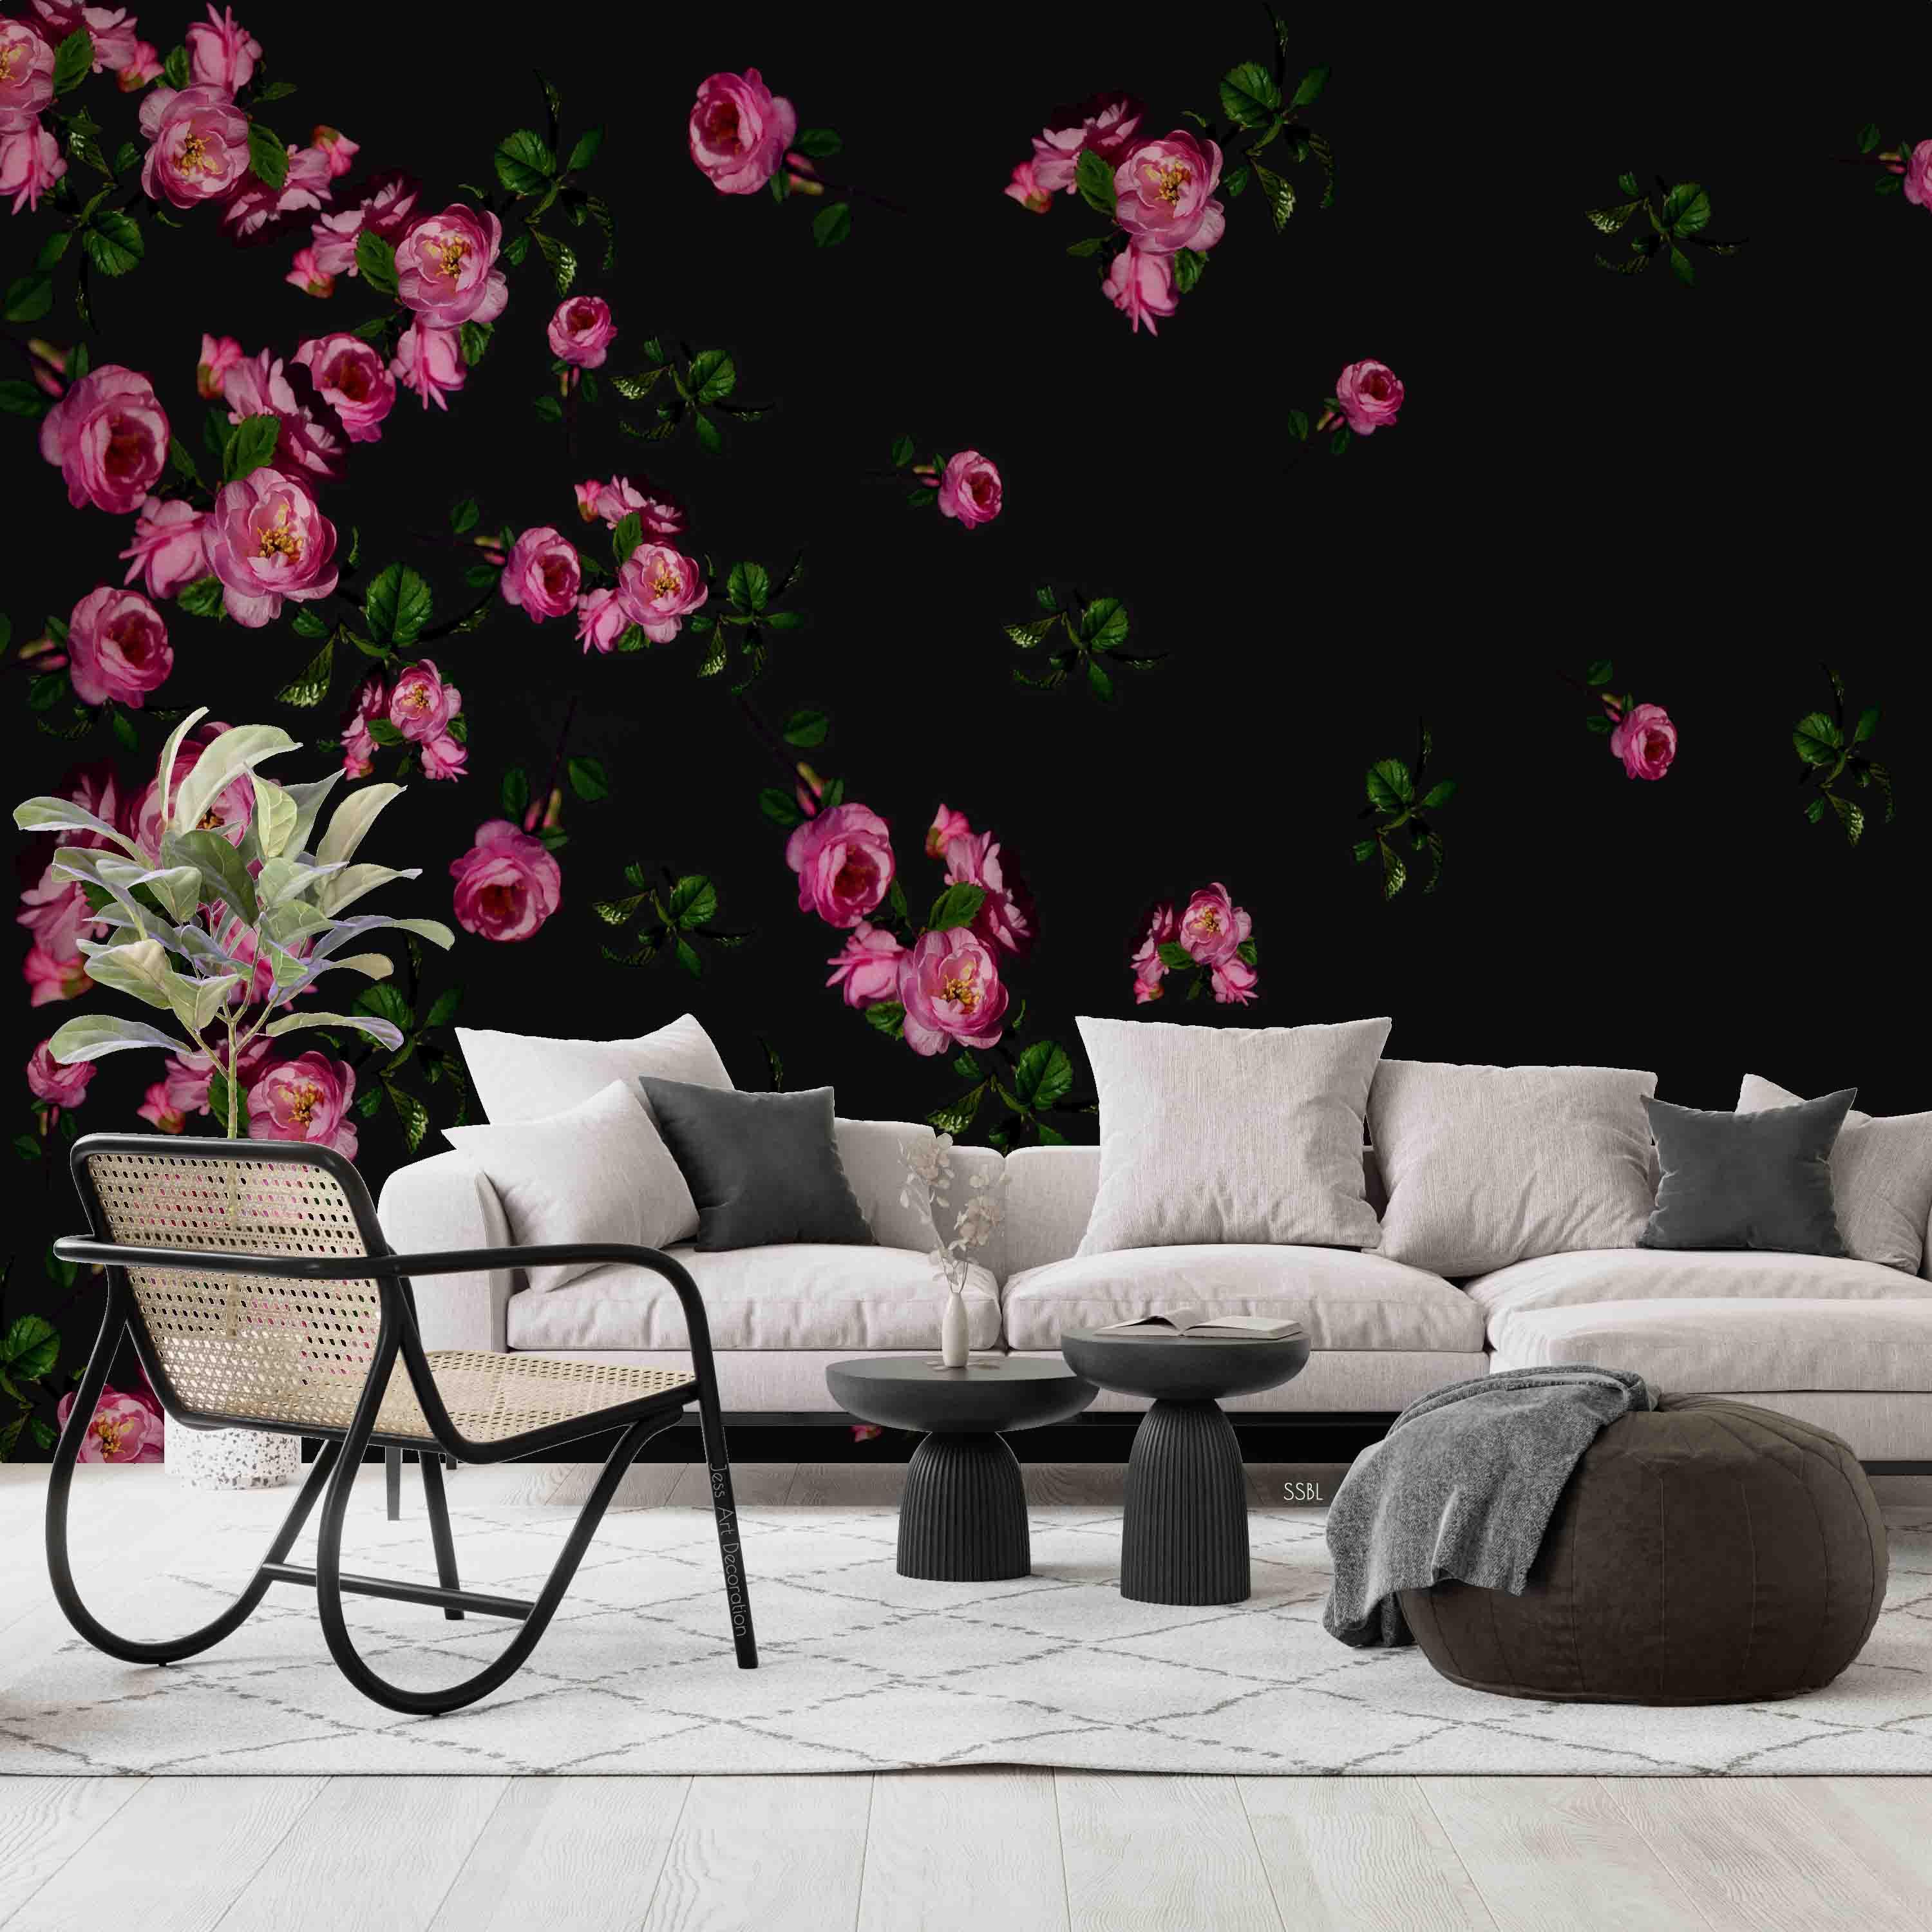 3D Vintage Blooming Pink Peony Black Background Wall Mural Wallpaper GD 3552- Jess Art Decoration